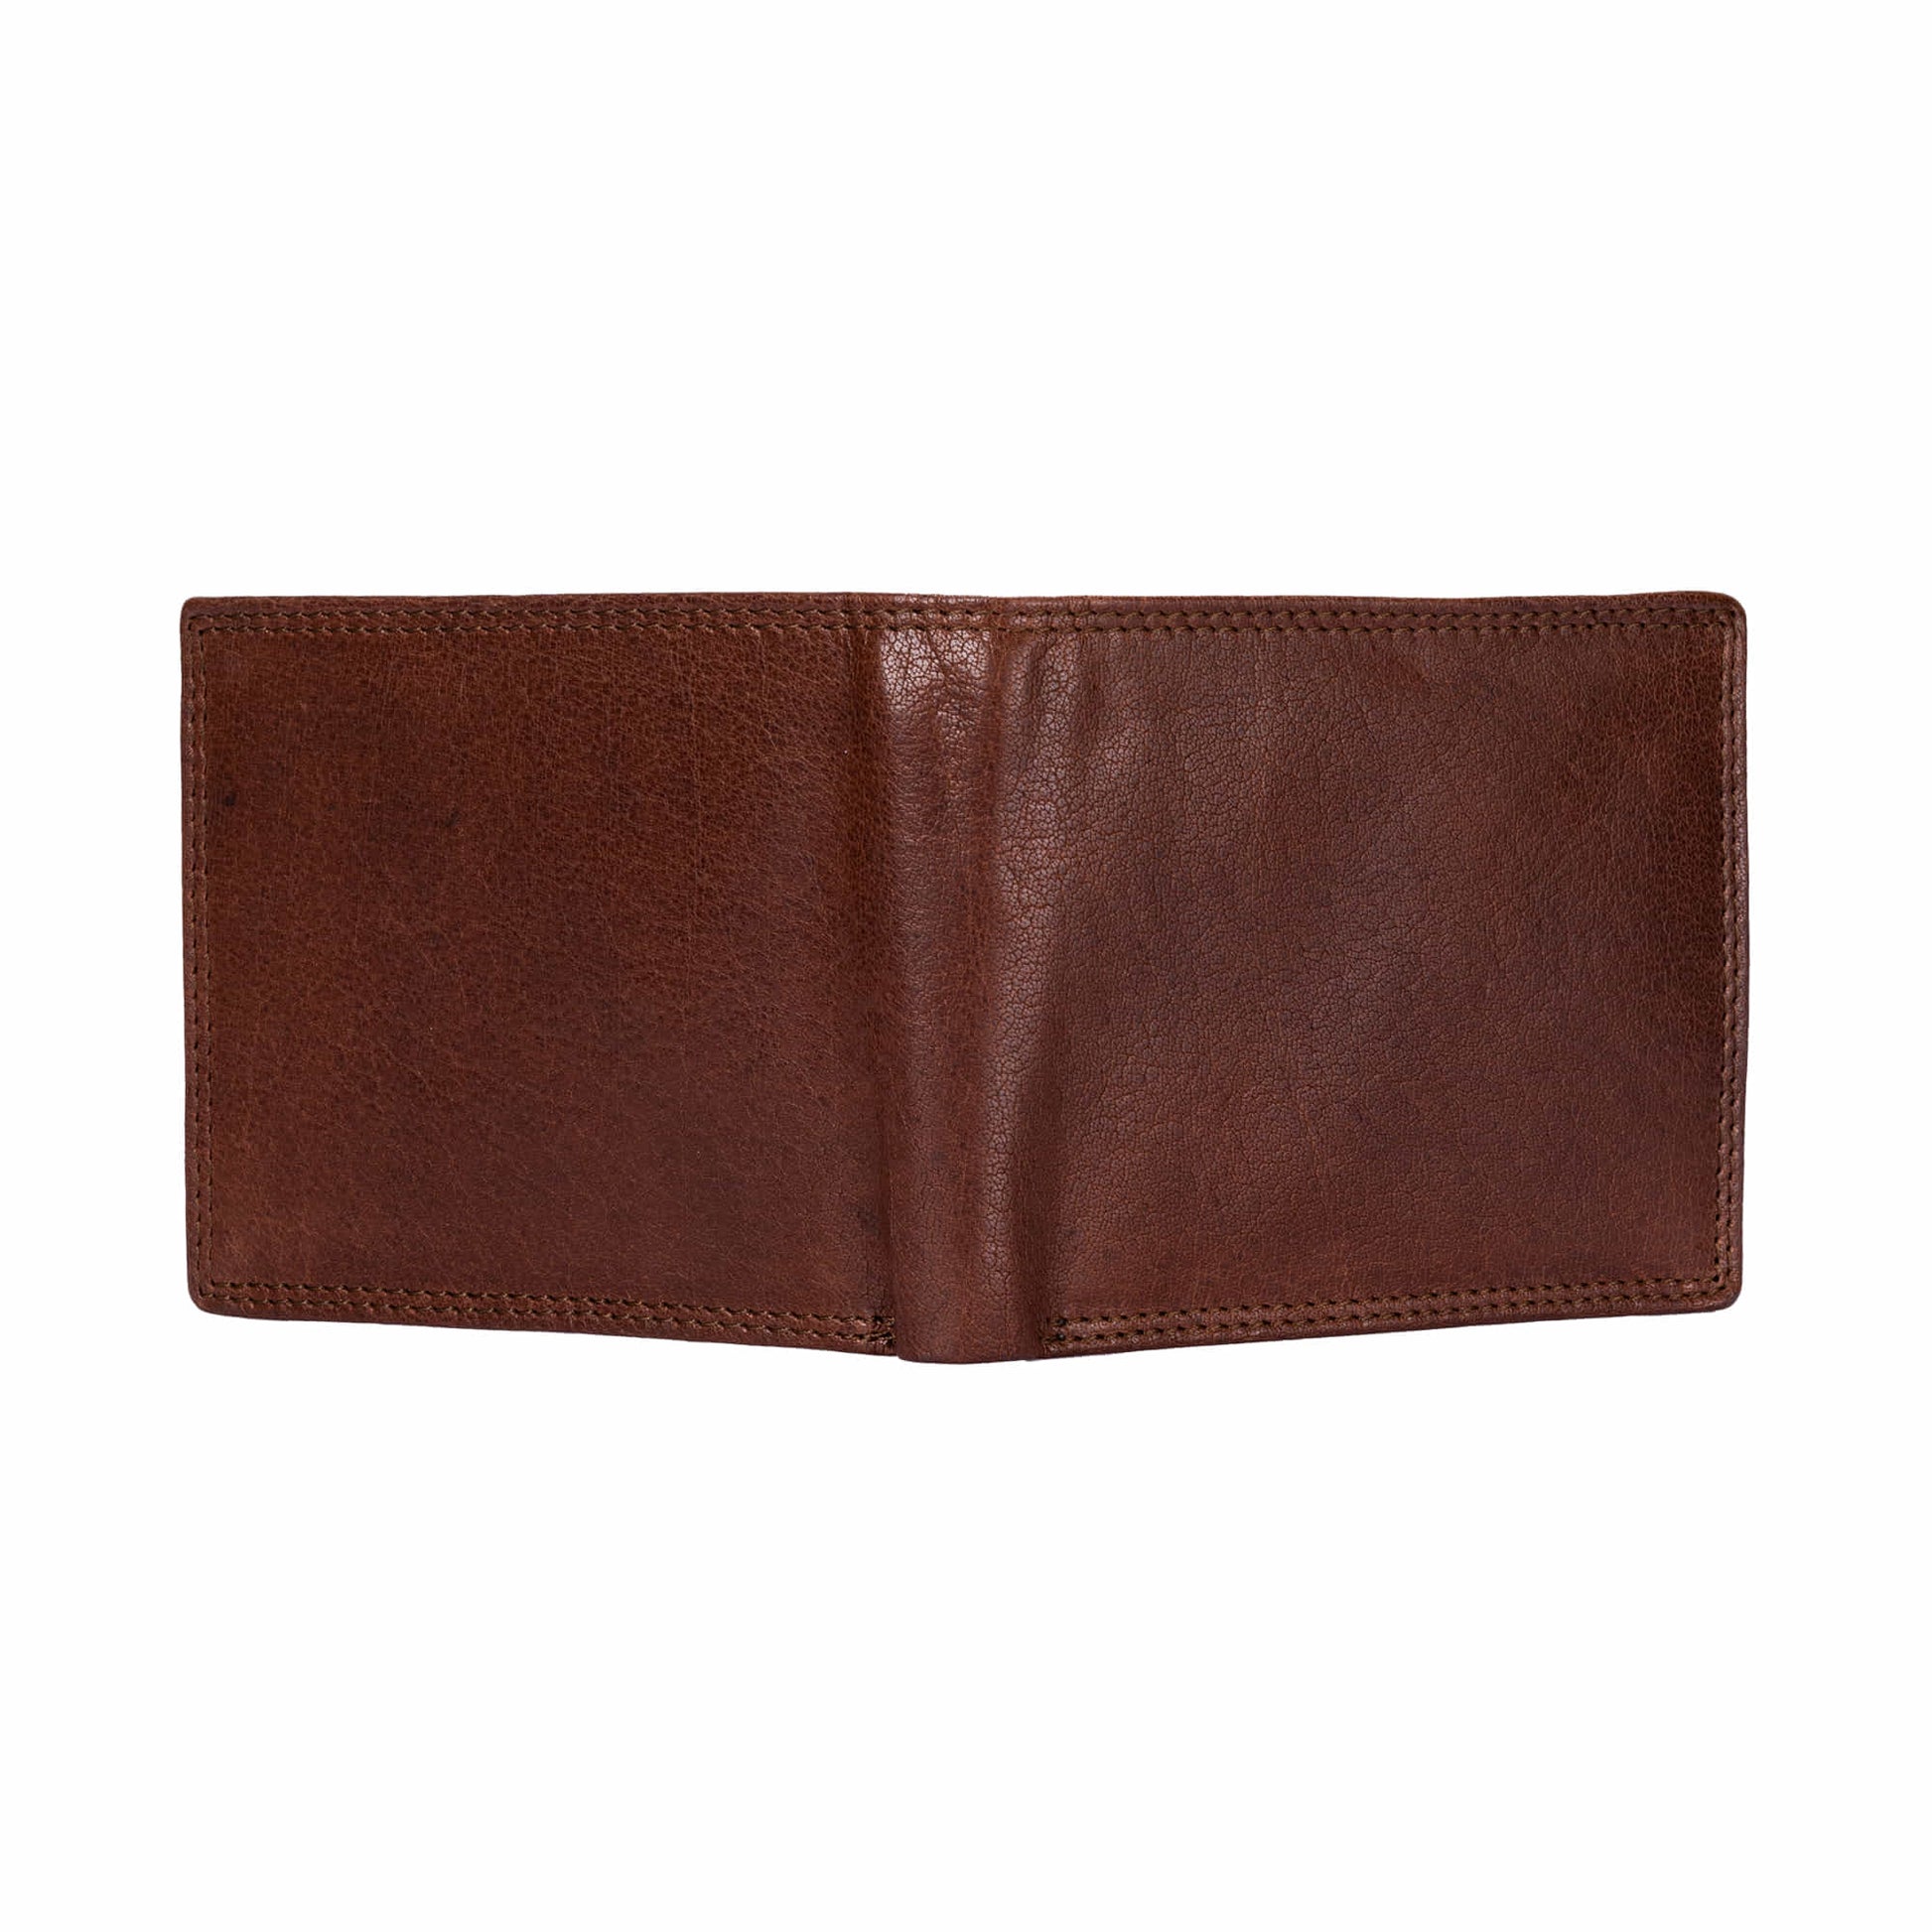 Style n Craft 301766 bifold wallet with side flap in dark brown color vintage leather with 2 tone effect - open view of the outside of the wallet